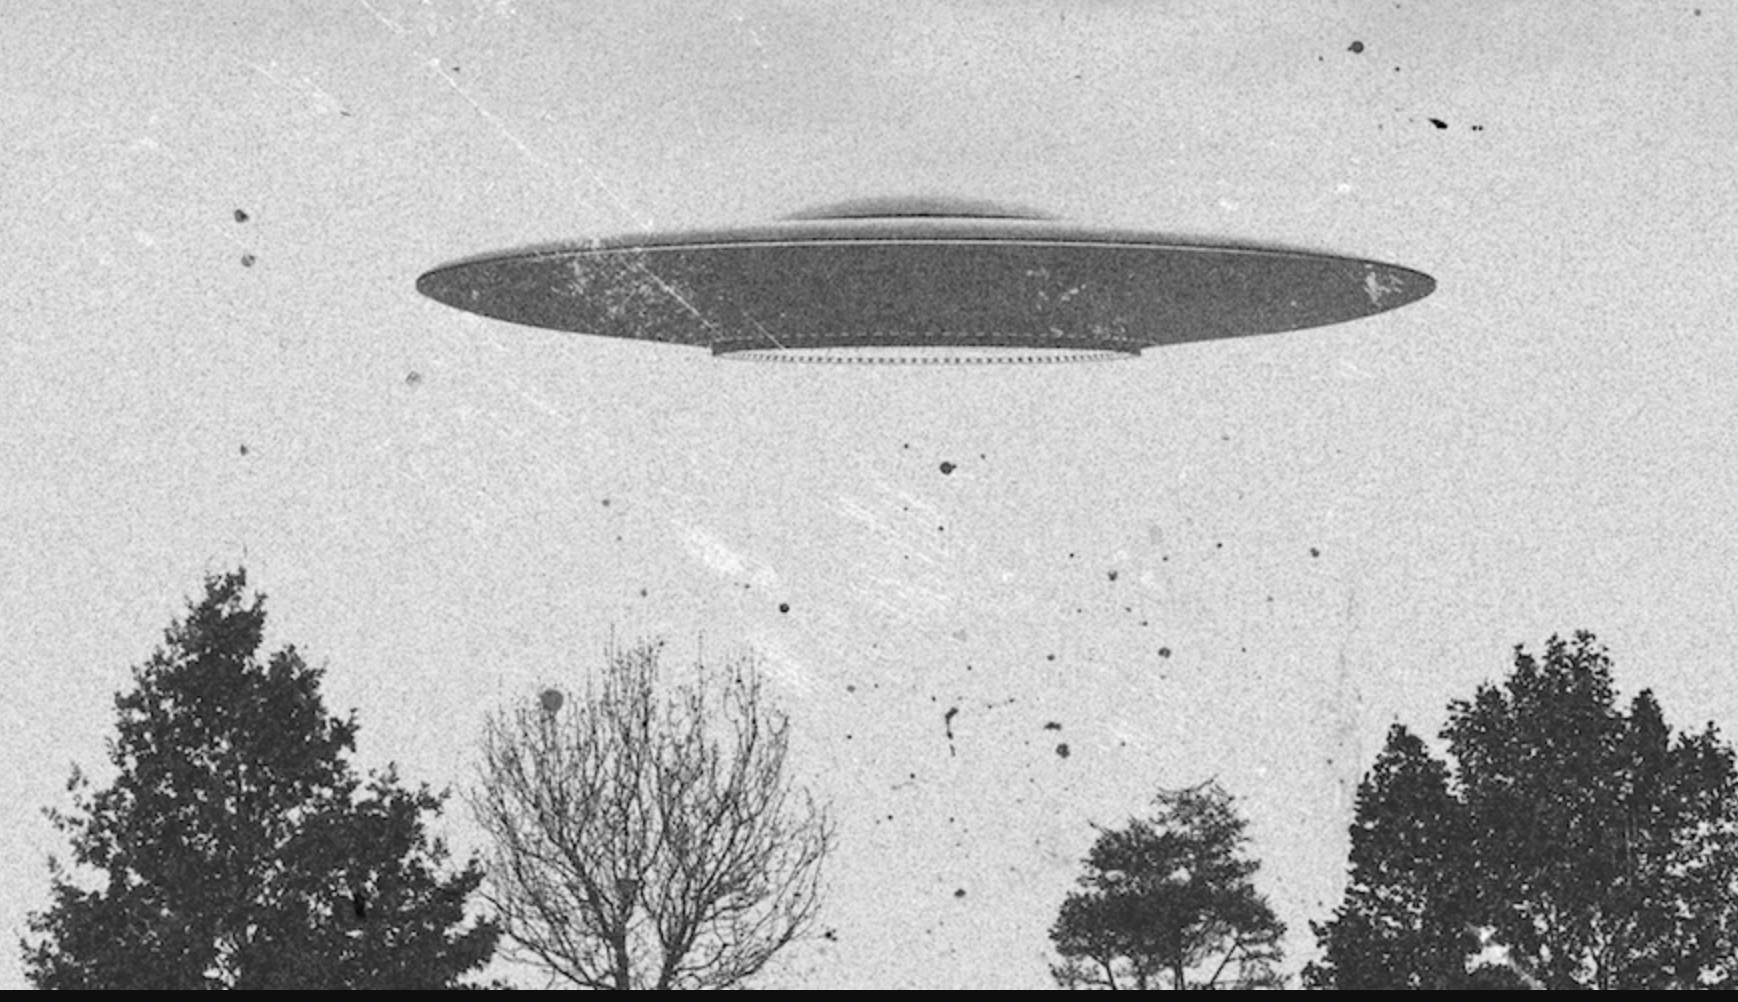 Close Encounters with UFOs in Chicago at Harold Washington